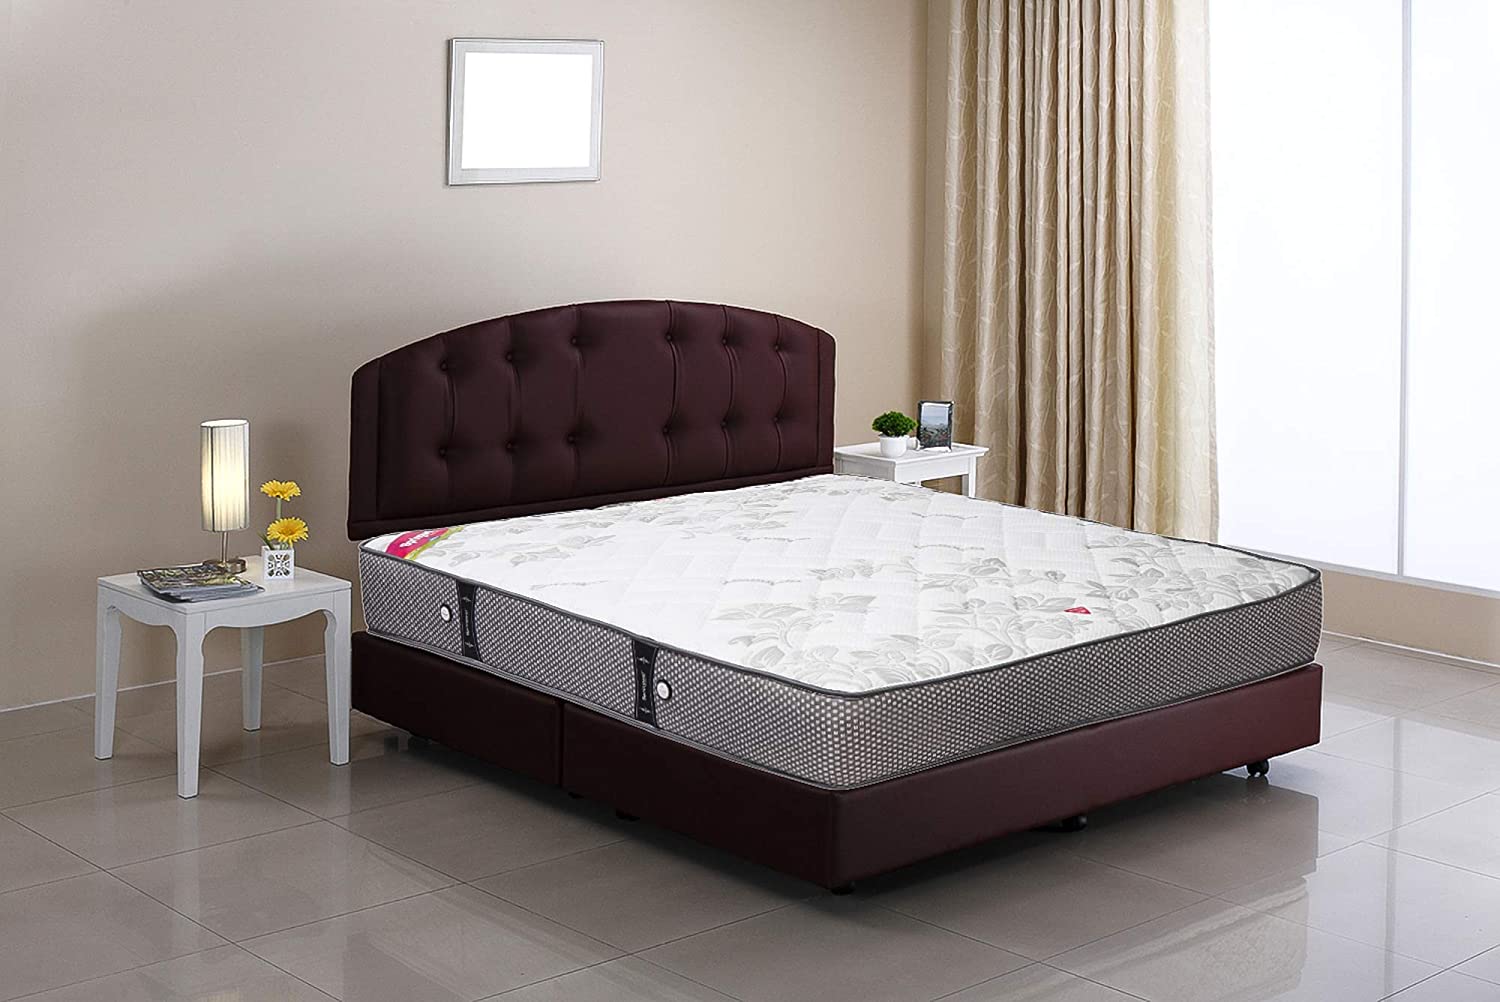 Everything About The Cheap Spring Mattress Singapore